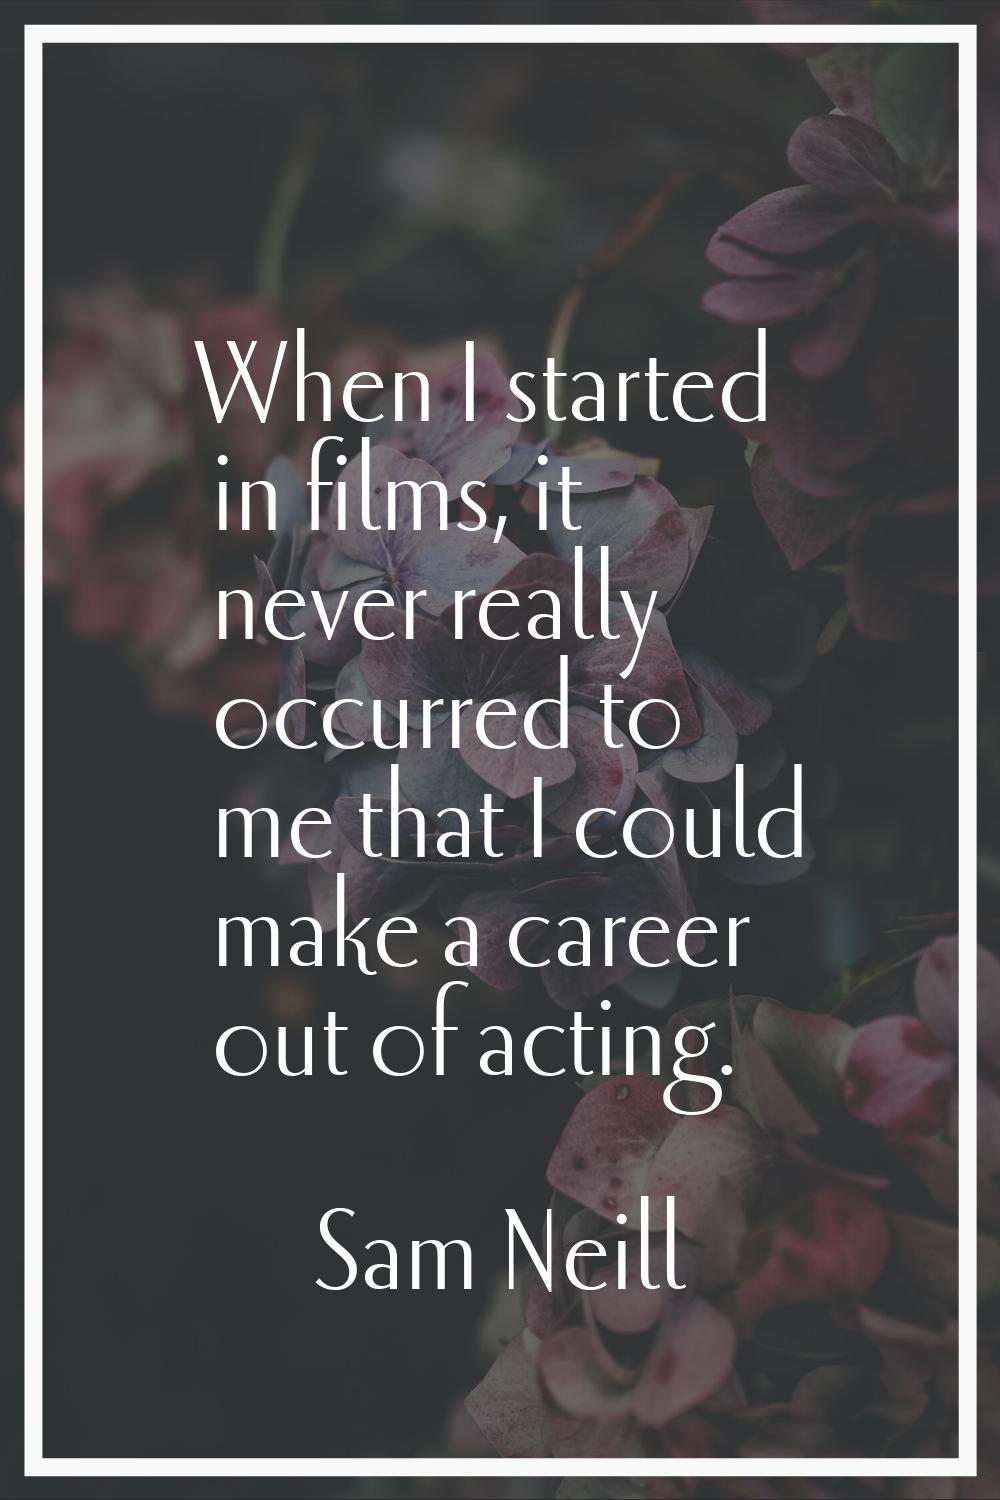 When I started in films, it never really occurred to me that I could make a career out of acting.